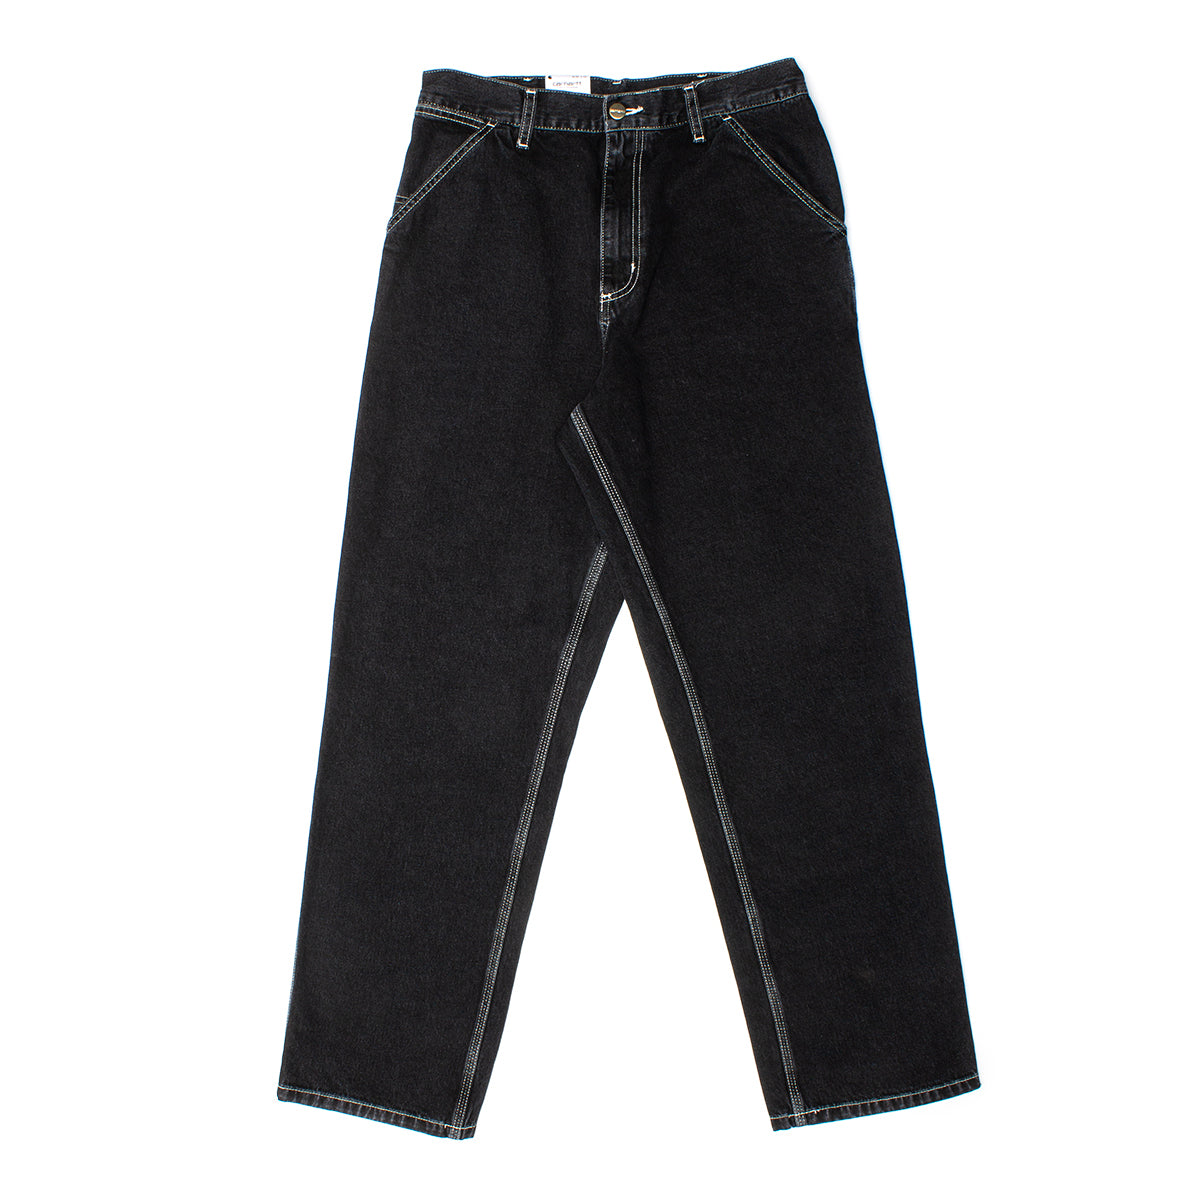 Carhartt WIP | Simple Pant Style # I022947-8906 Color : Black (Stone Washed)